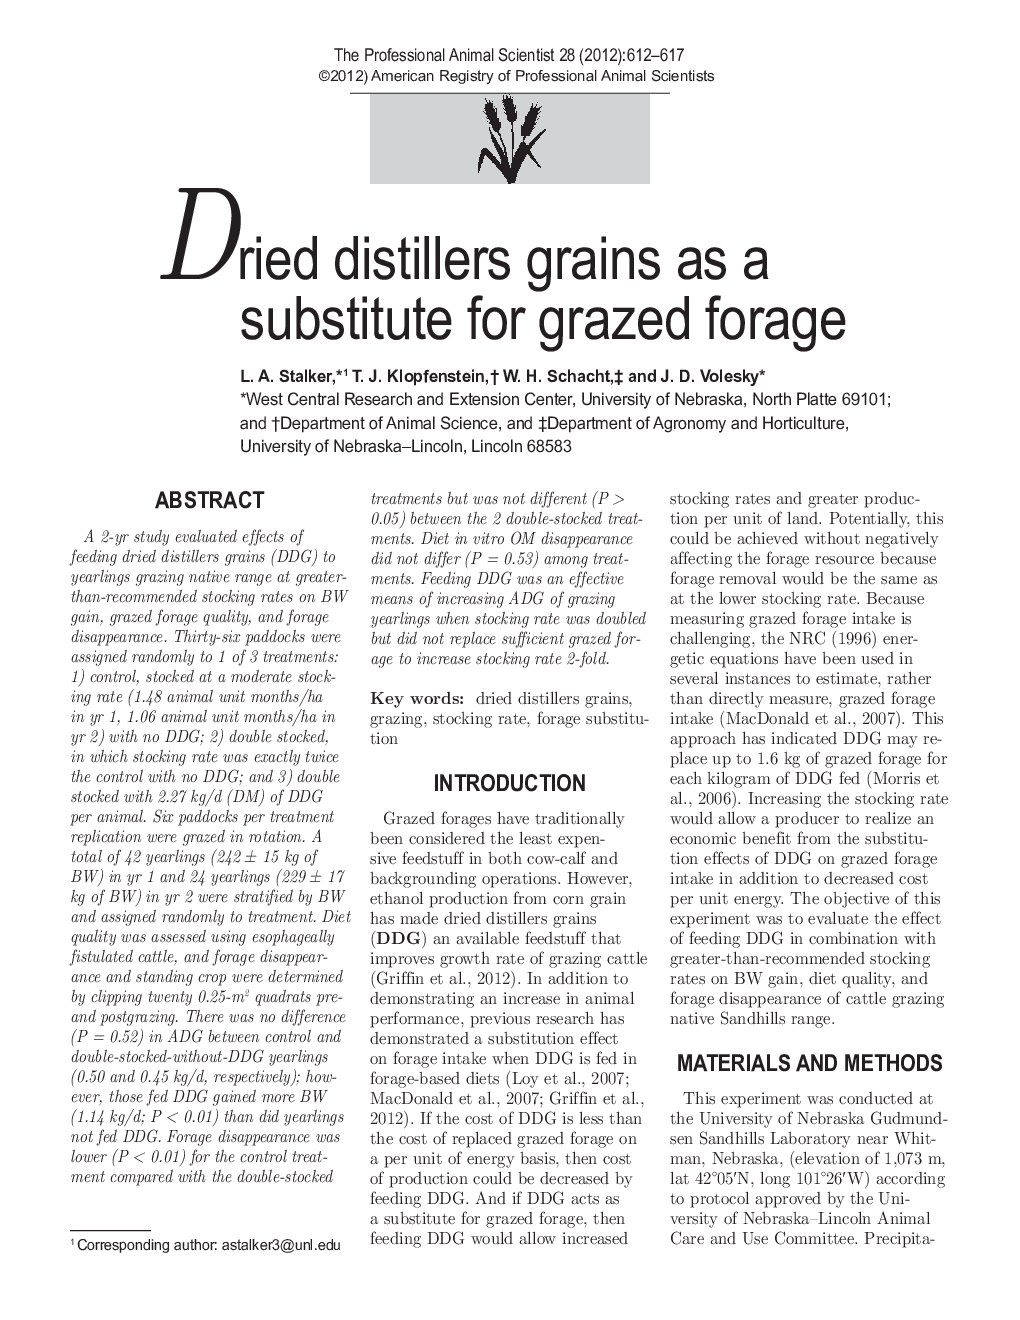 Dried distillers grains as a substitute for grazed forage